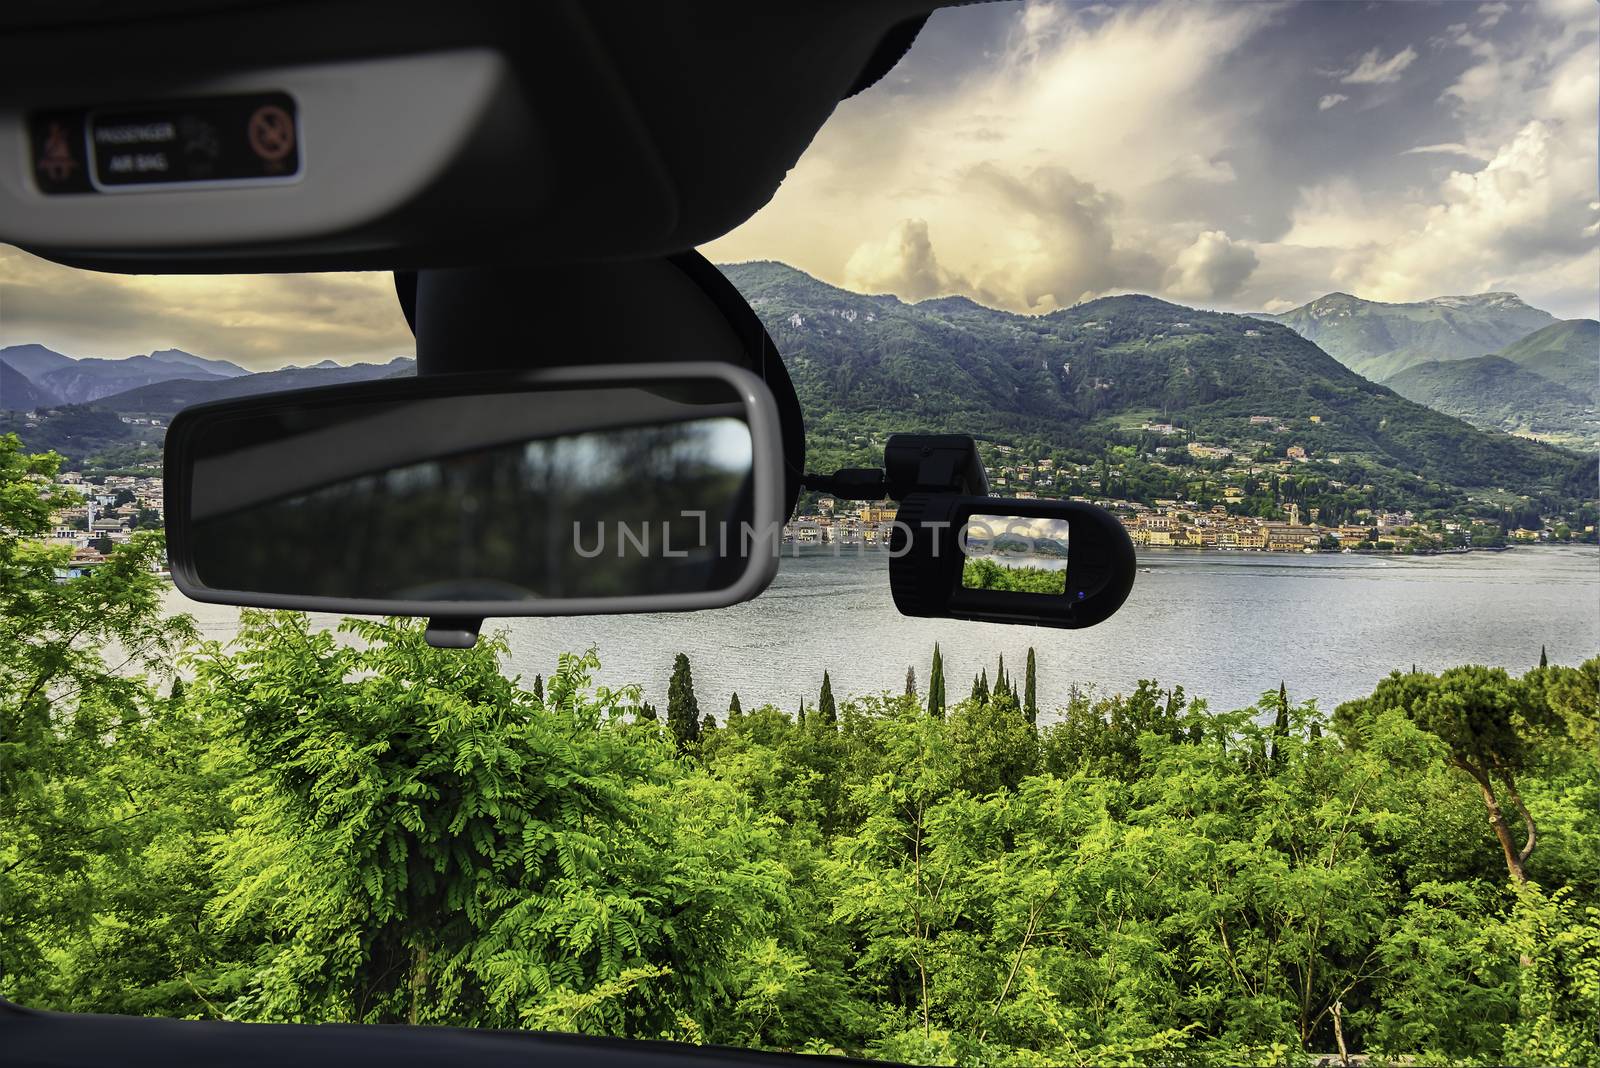 Looking through a dashcam car camera installed on a windshield with view of the town of Salo, on the Lake Garda, Italy